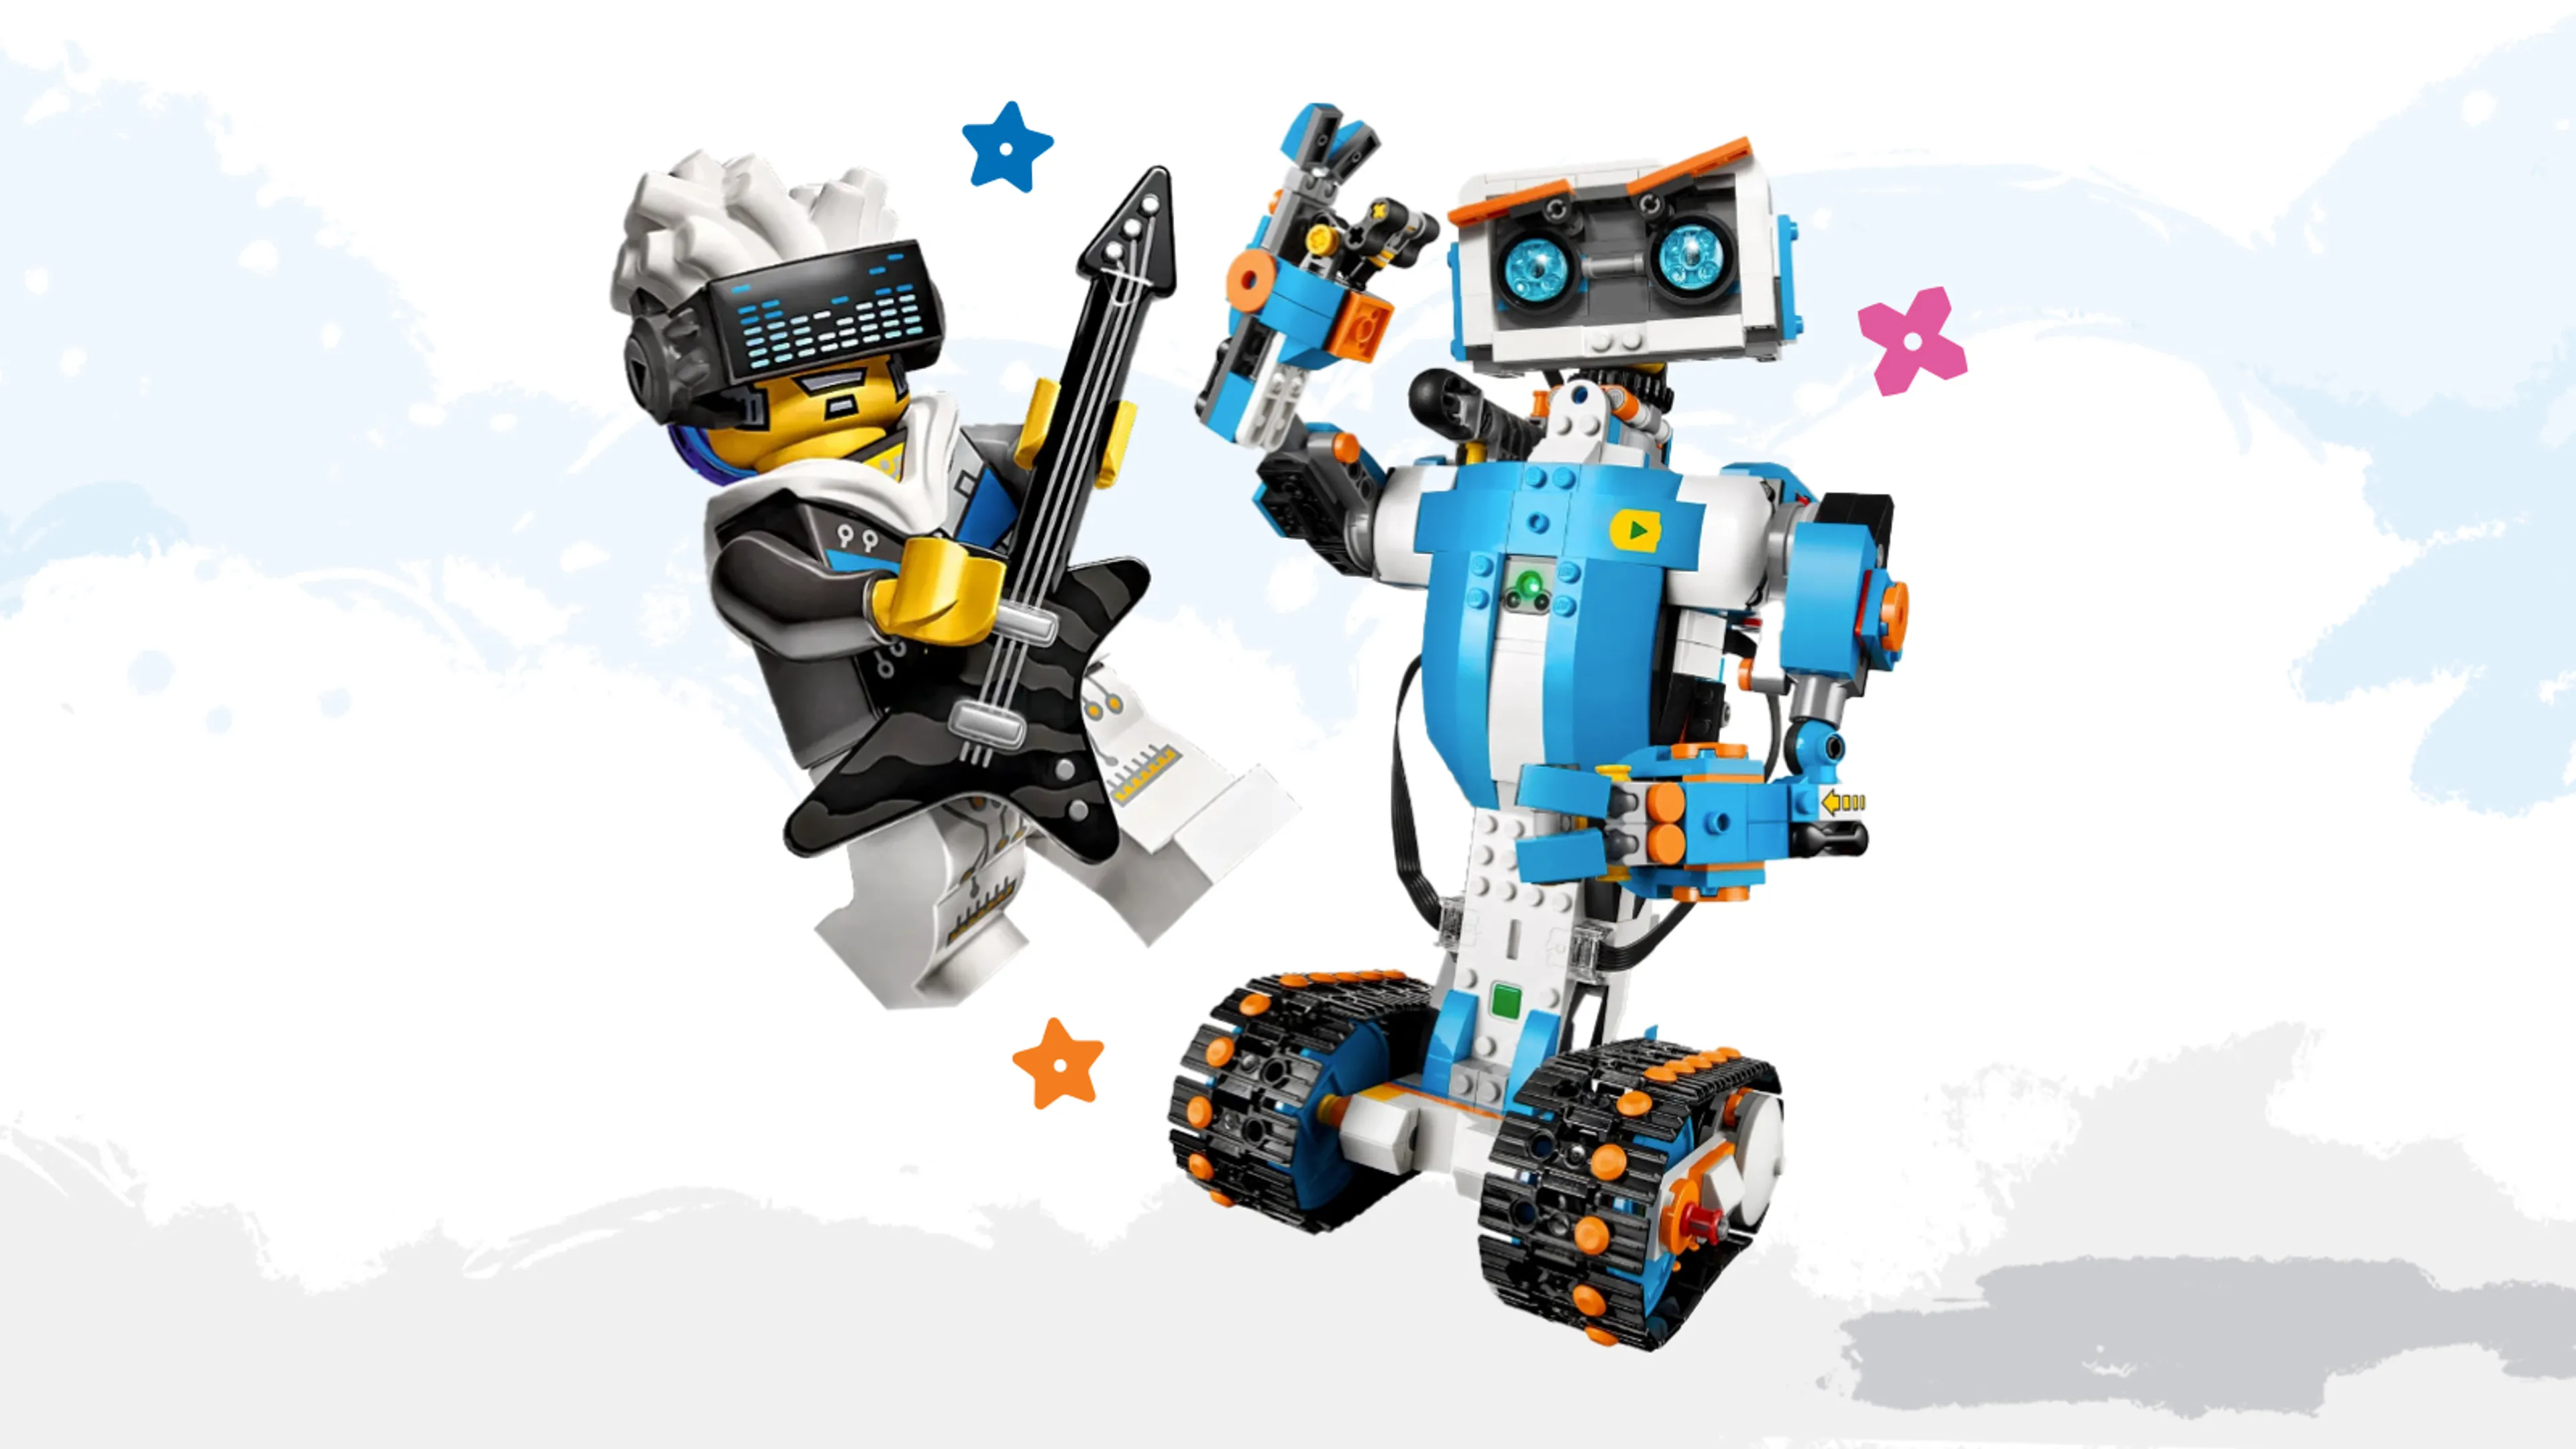 A rock star minifigure and a LEGO robot